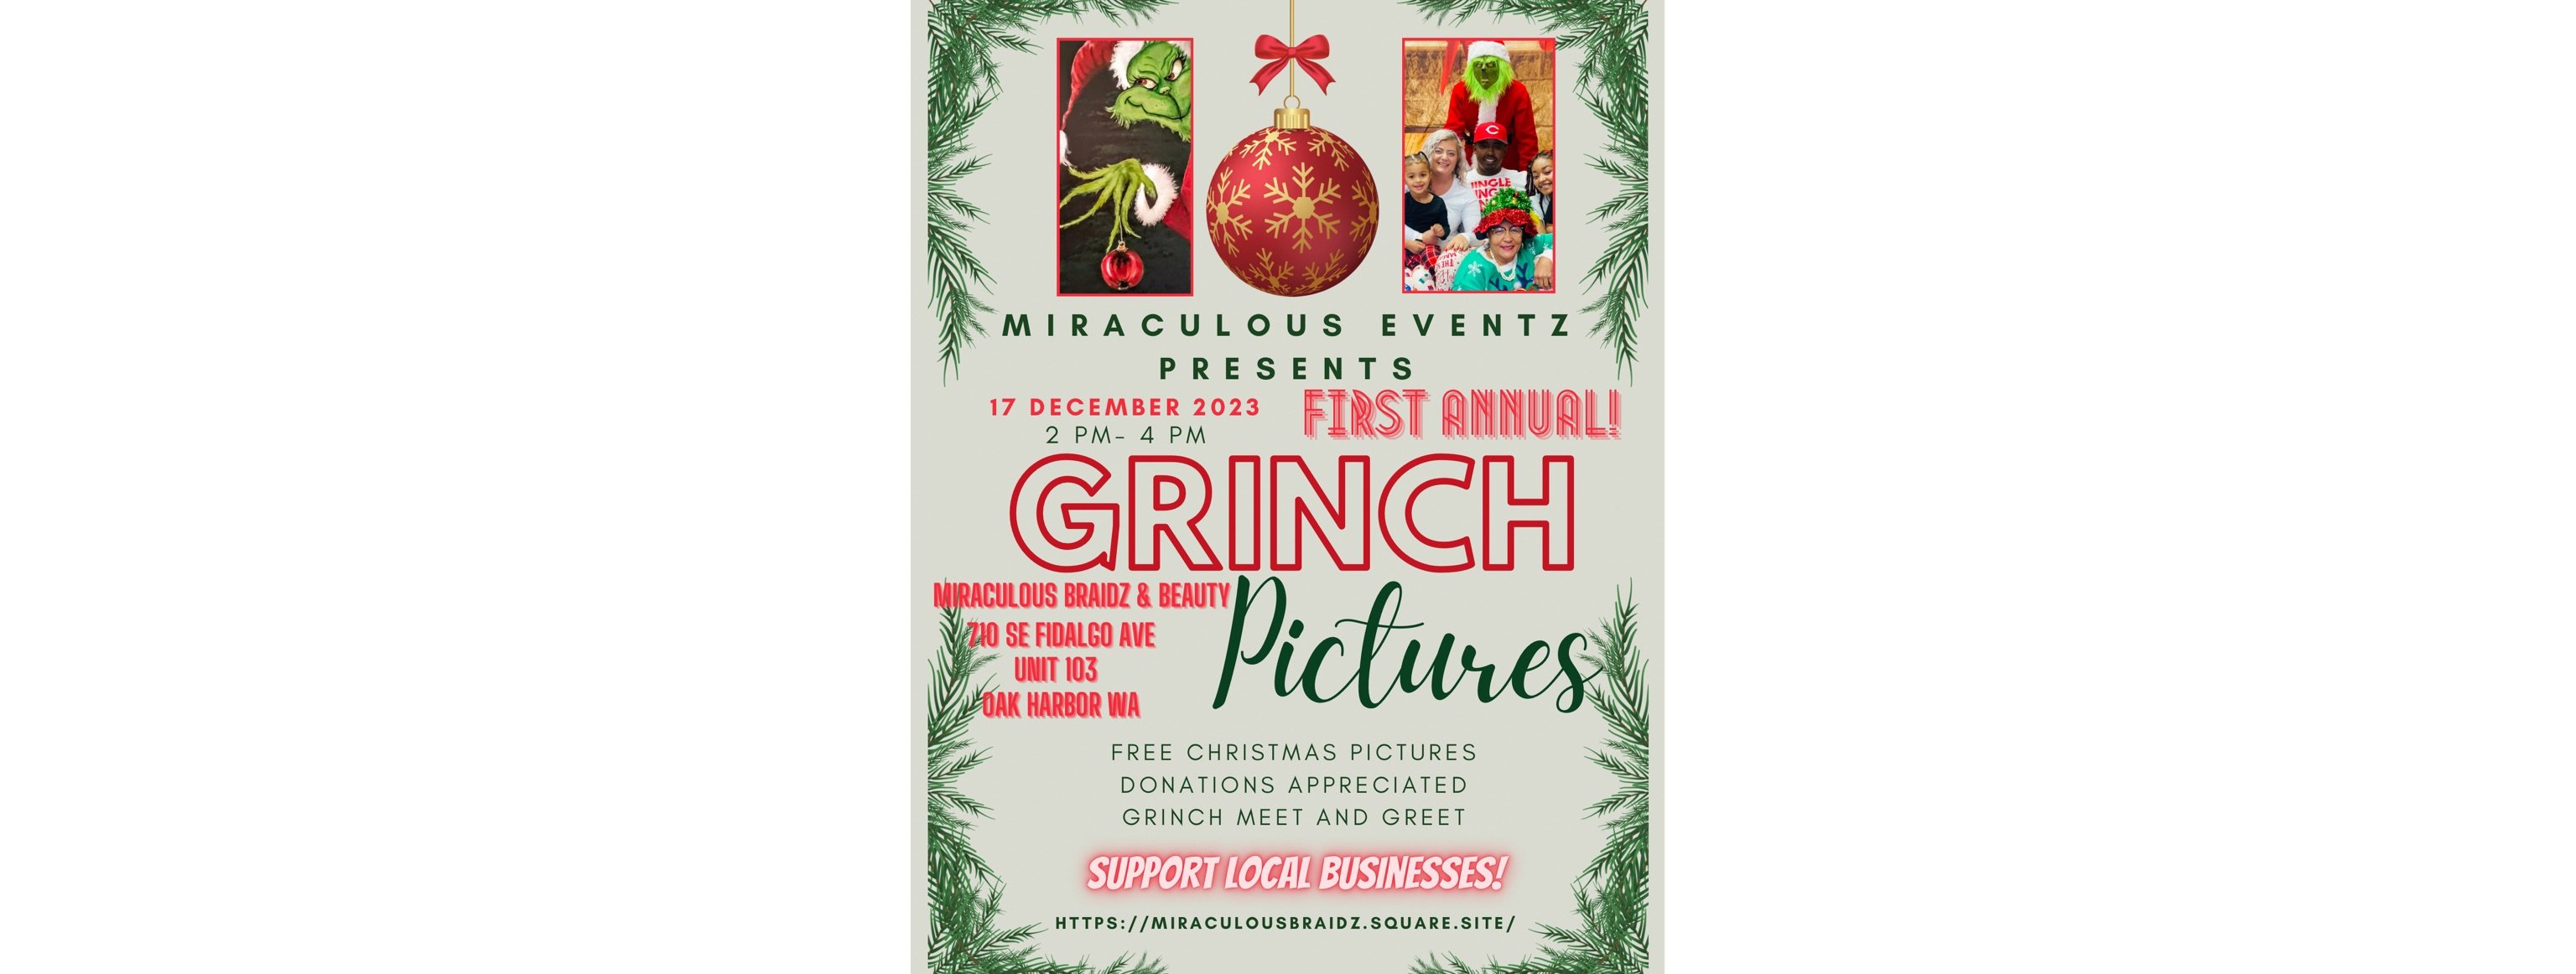 Discover The Grinch Photoshoot Events & Activities in Burlington, WA